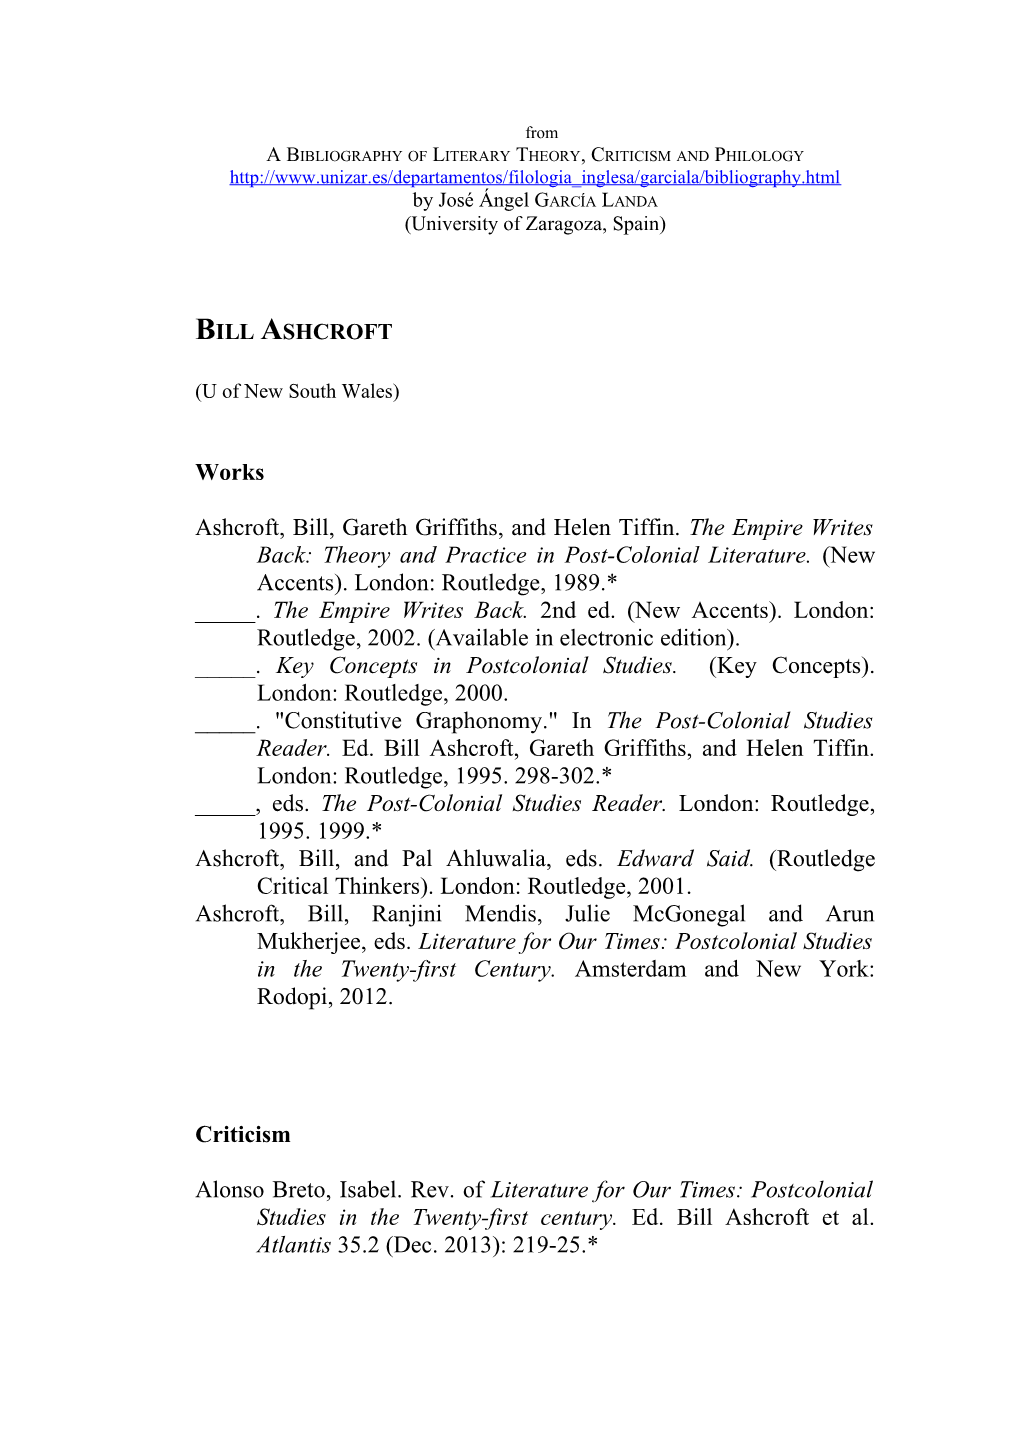 A Bibliography of Literary Theory, Criticism and Philology s121